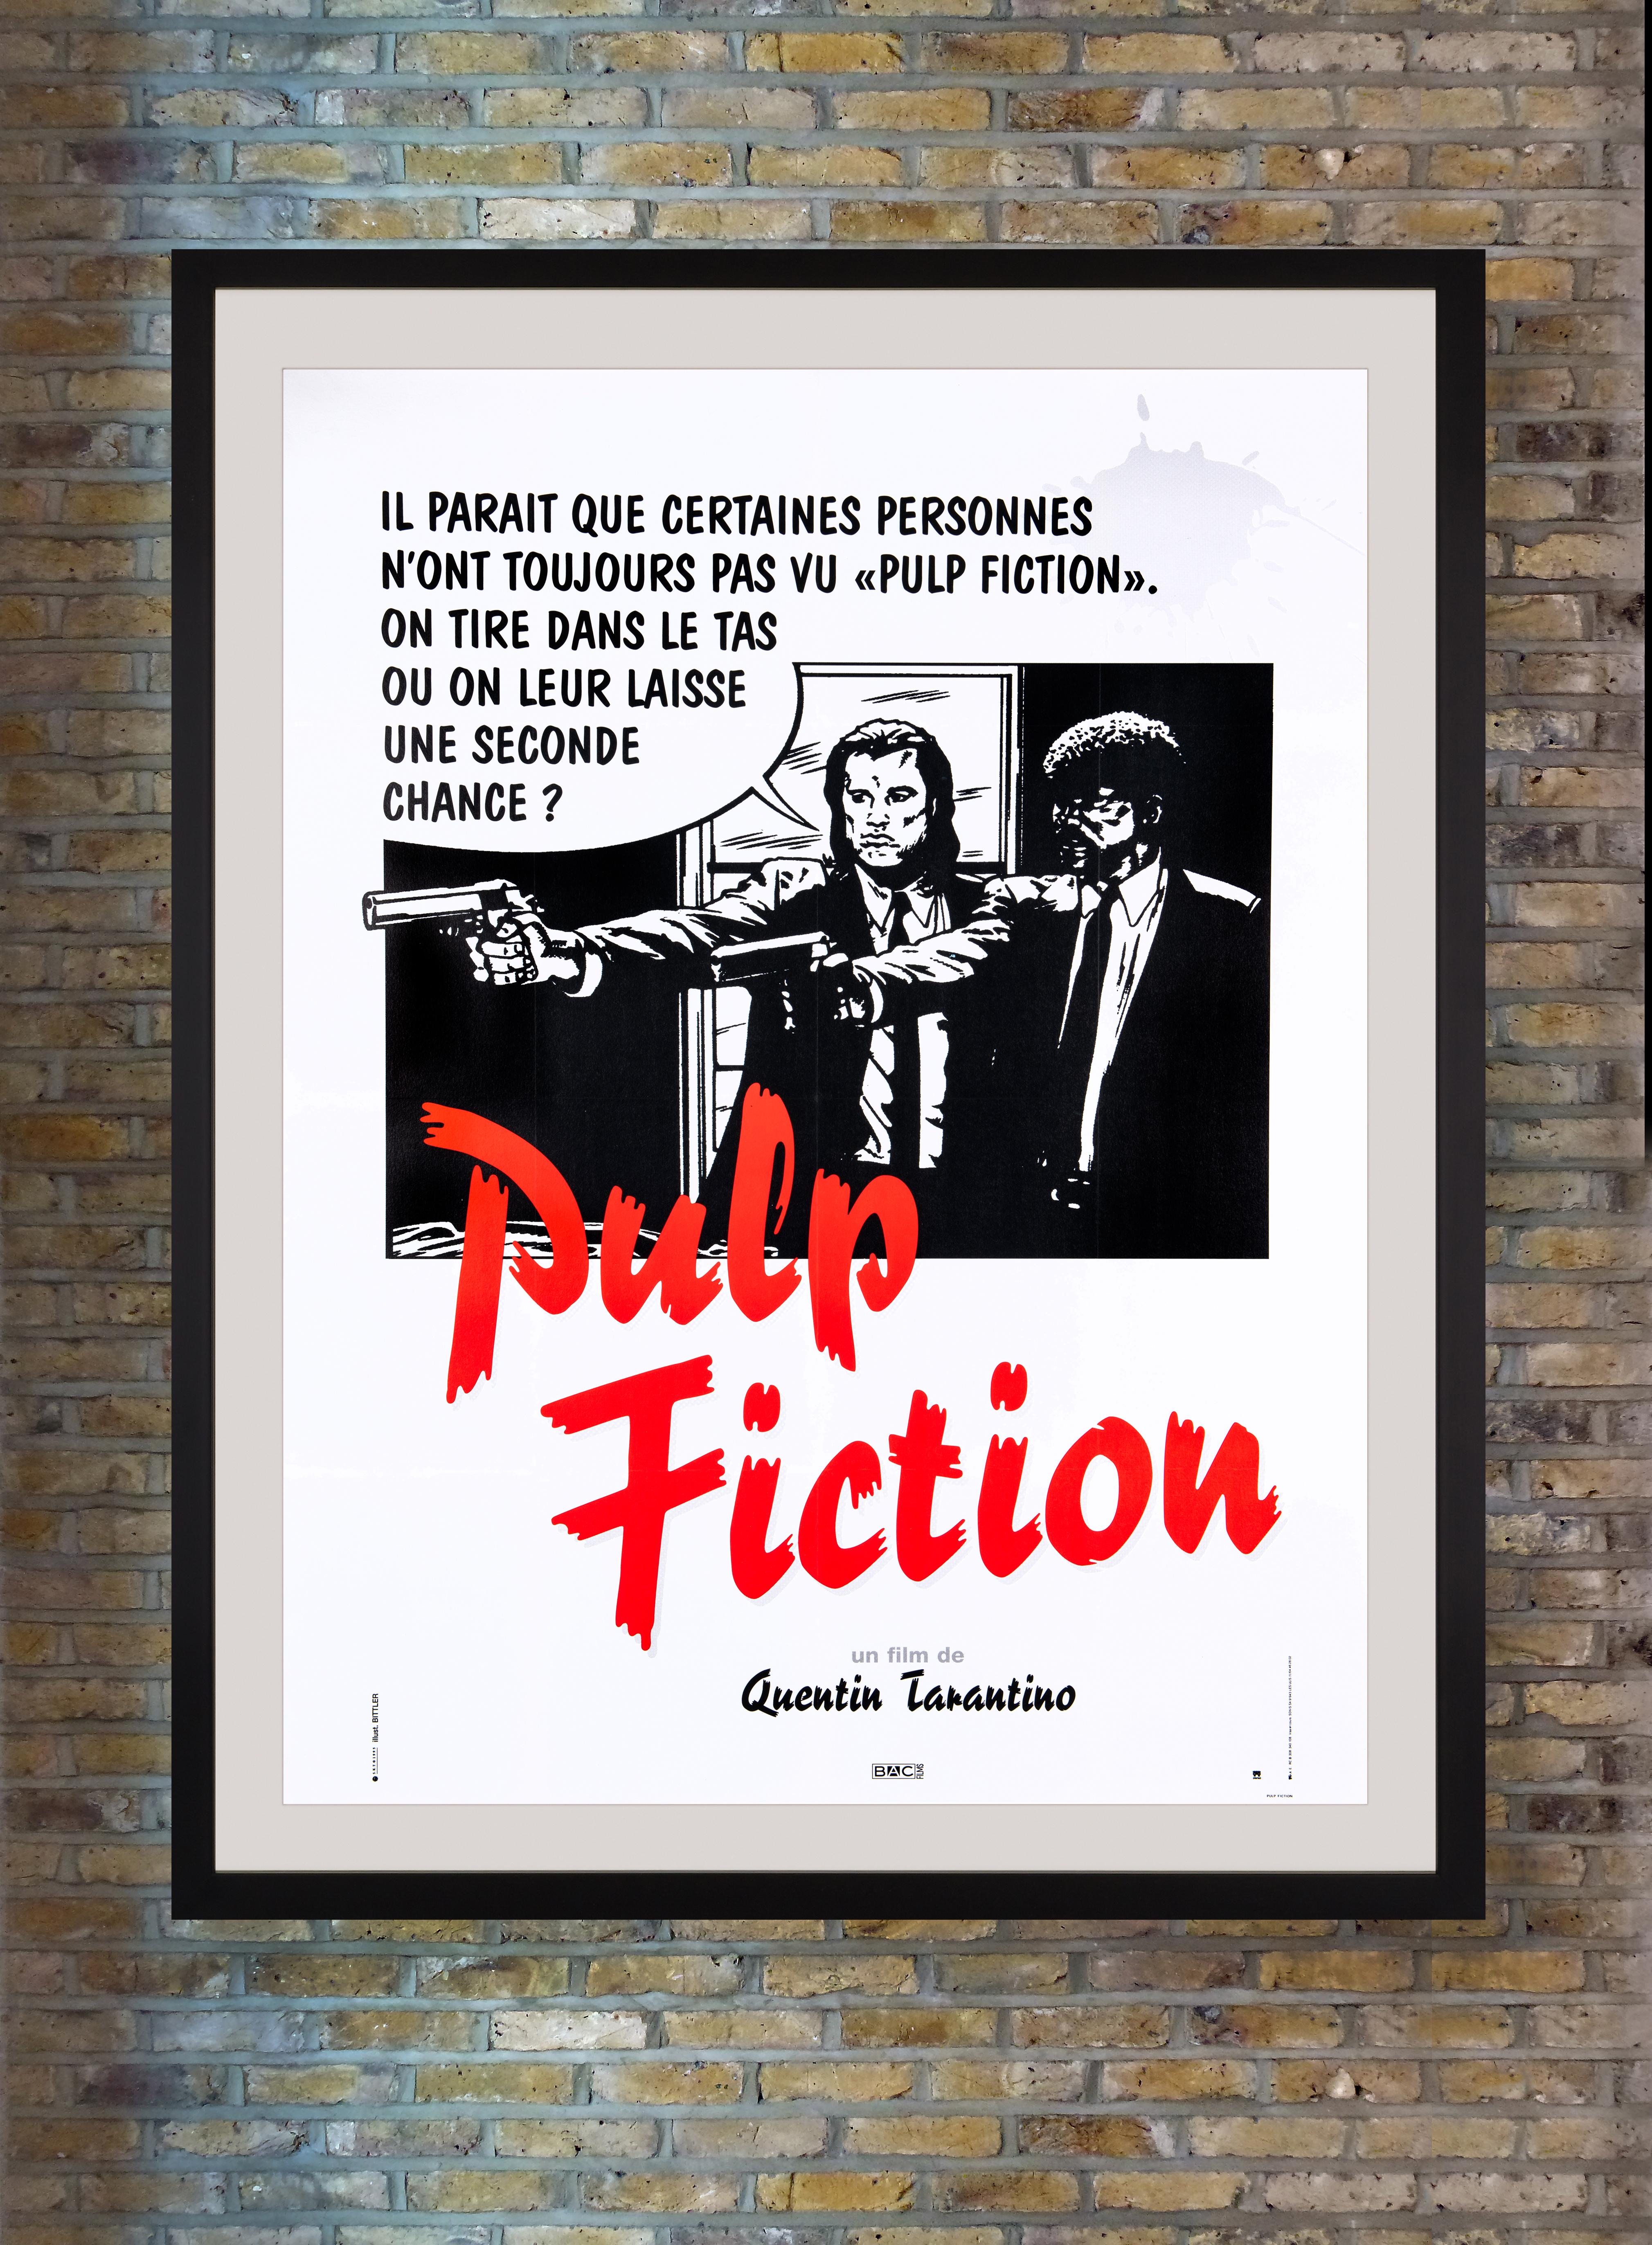 Widely regarded as Quentin Tarantino's masterpiece, the ultra-violent comedic crime thriller 'Pulp Fiction' followed the intertwining tales of Los Angeles oddballs John Travolta, Samuel L. Jackson, Uma Thurman and Bruce Willis with a punchy dialogue